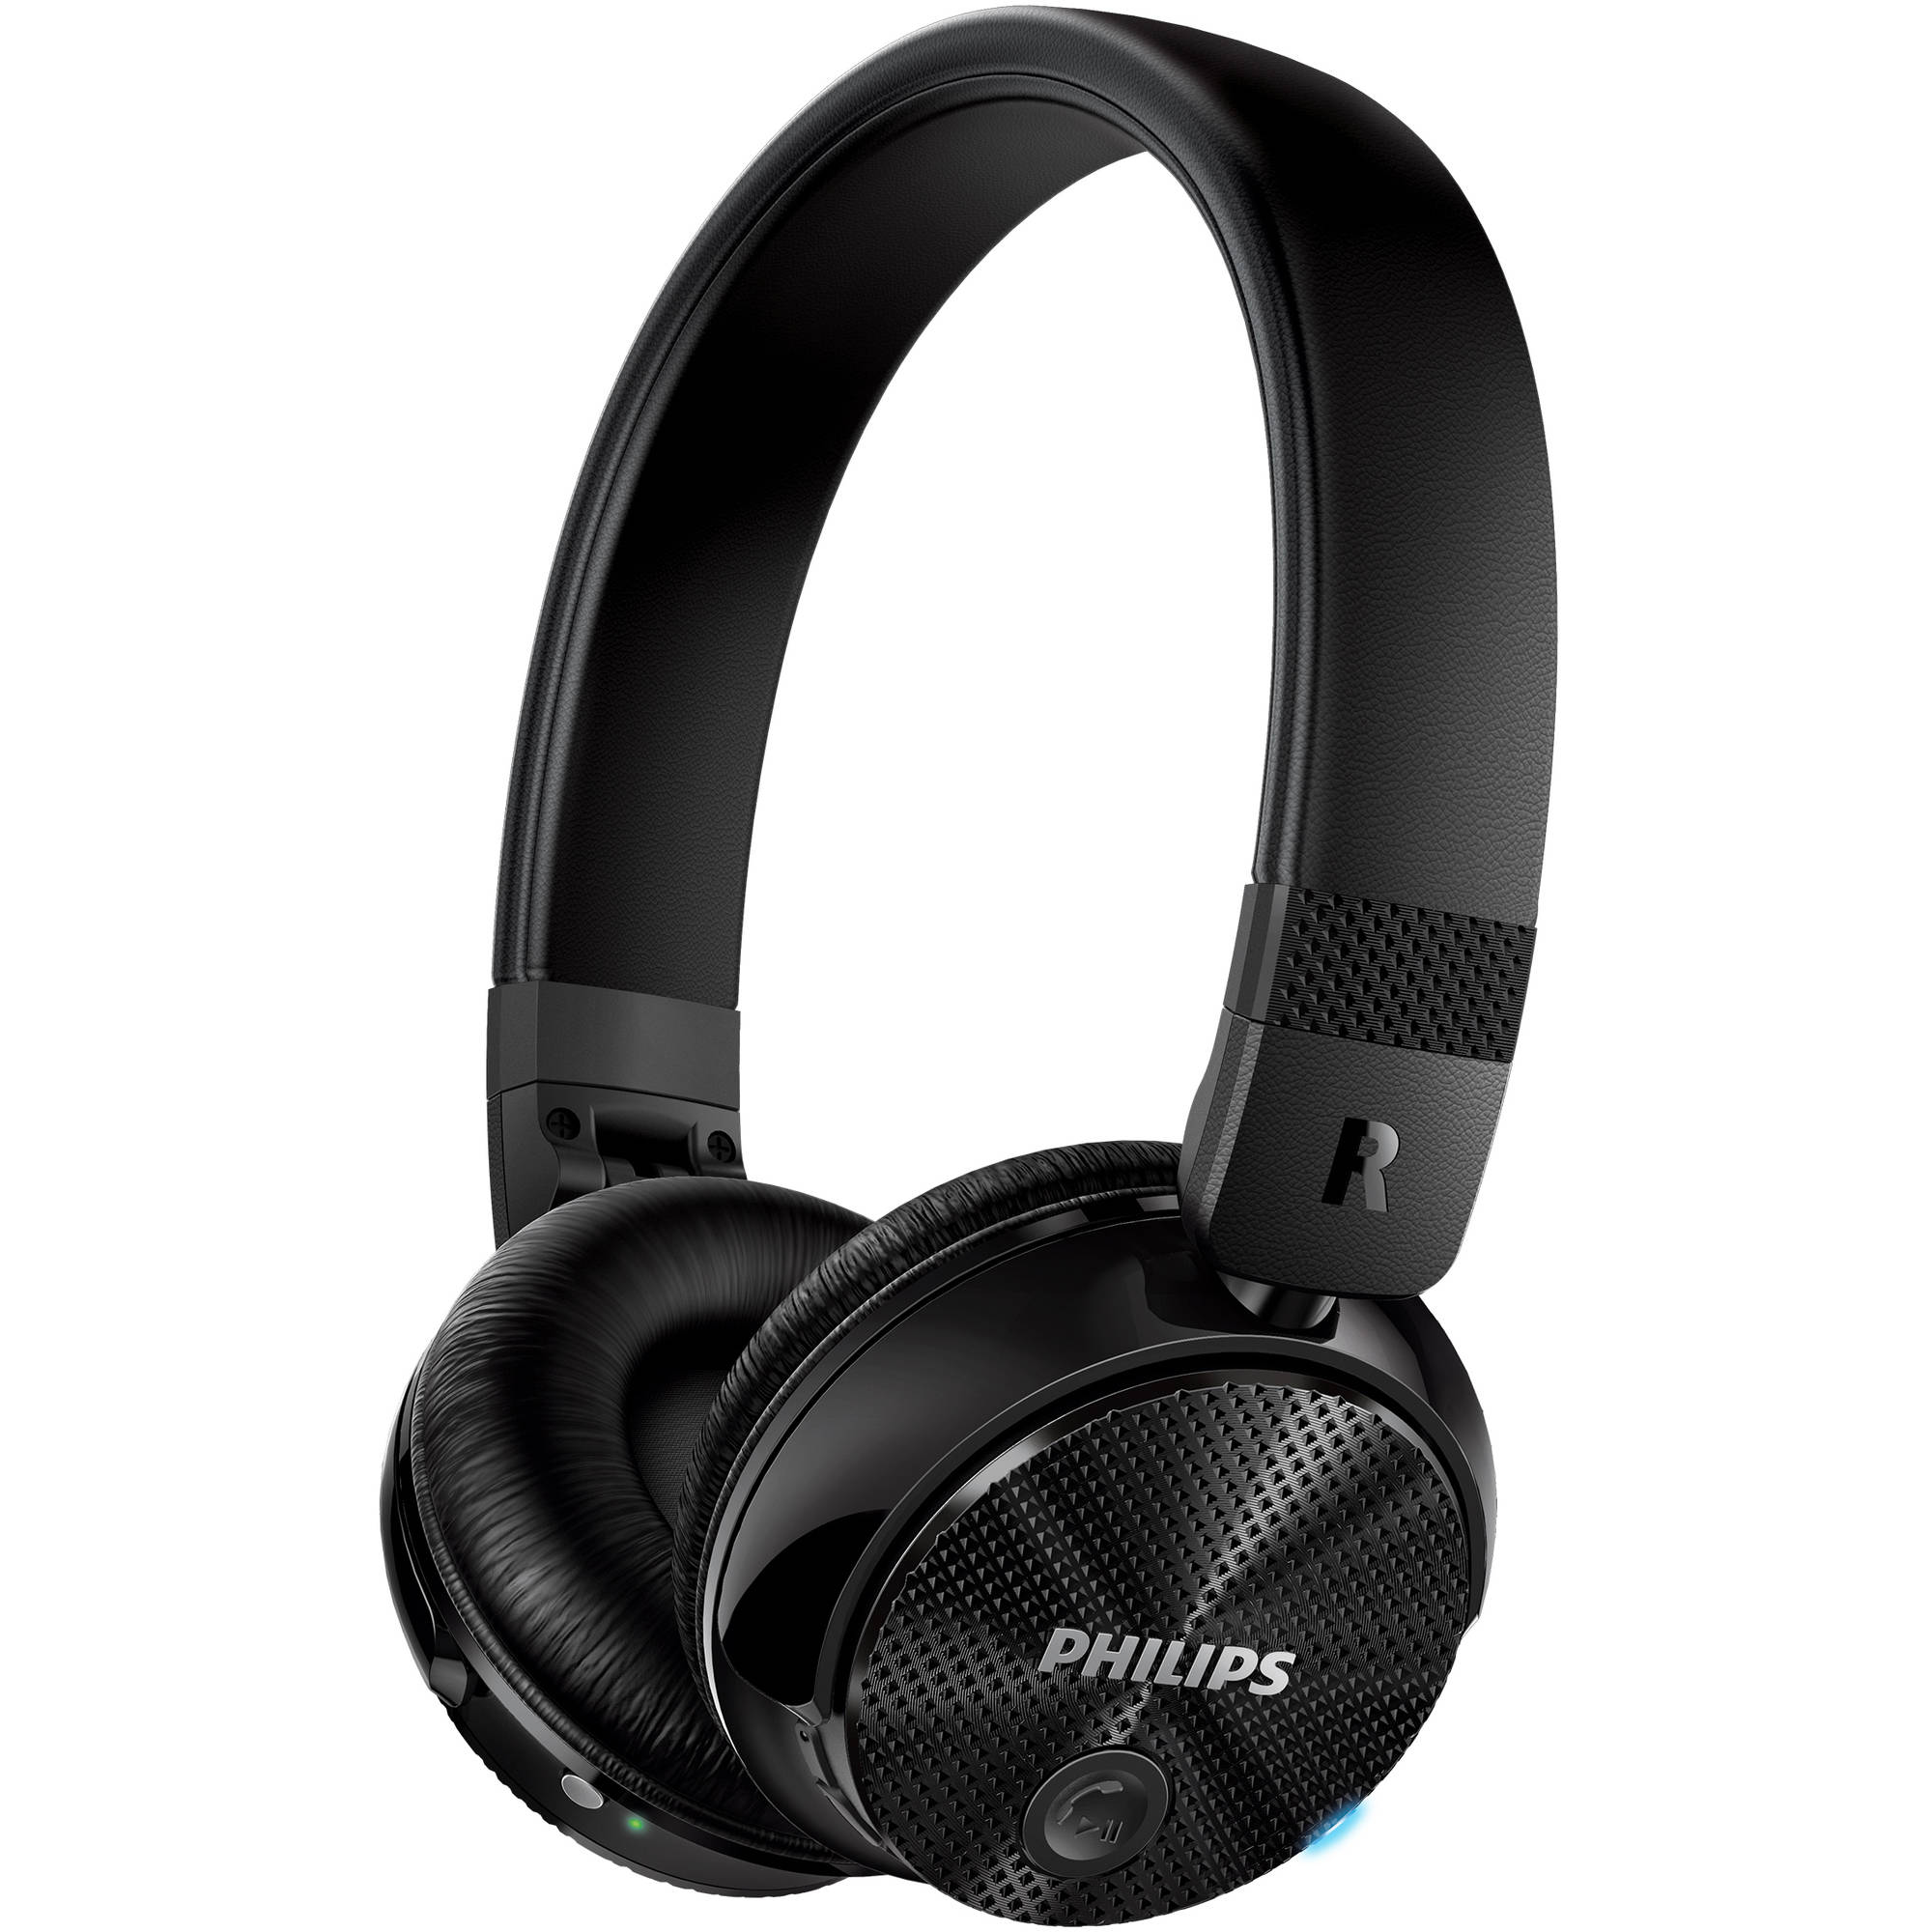 Philips Wireless Noise Cancelling Headphones - image 5 of 5